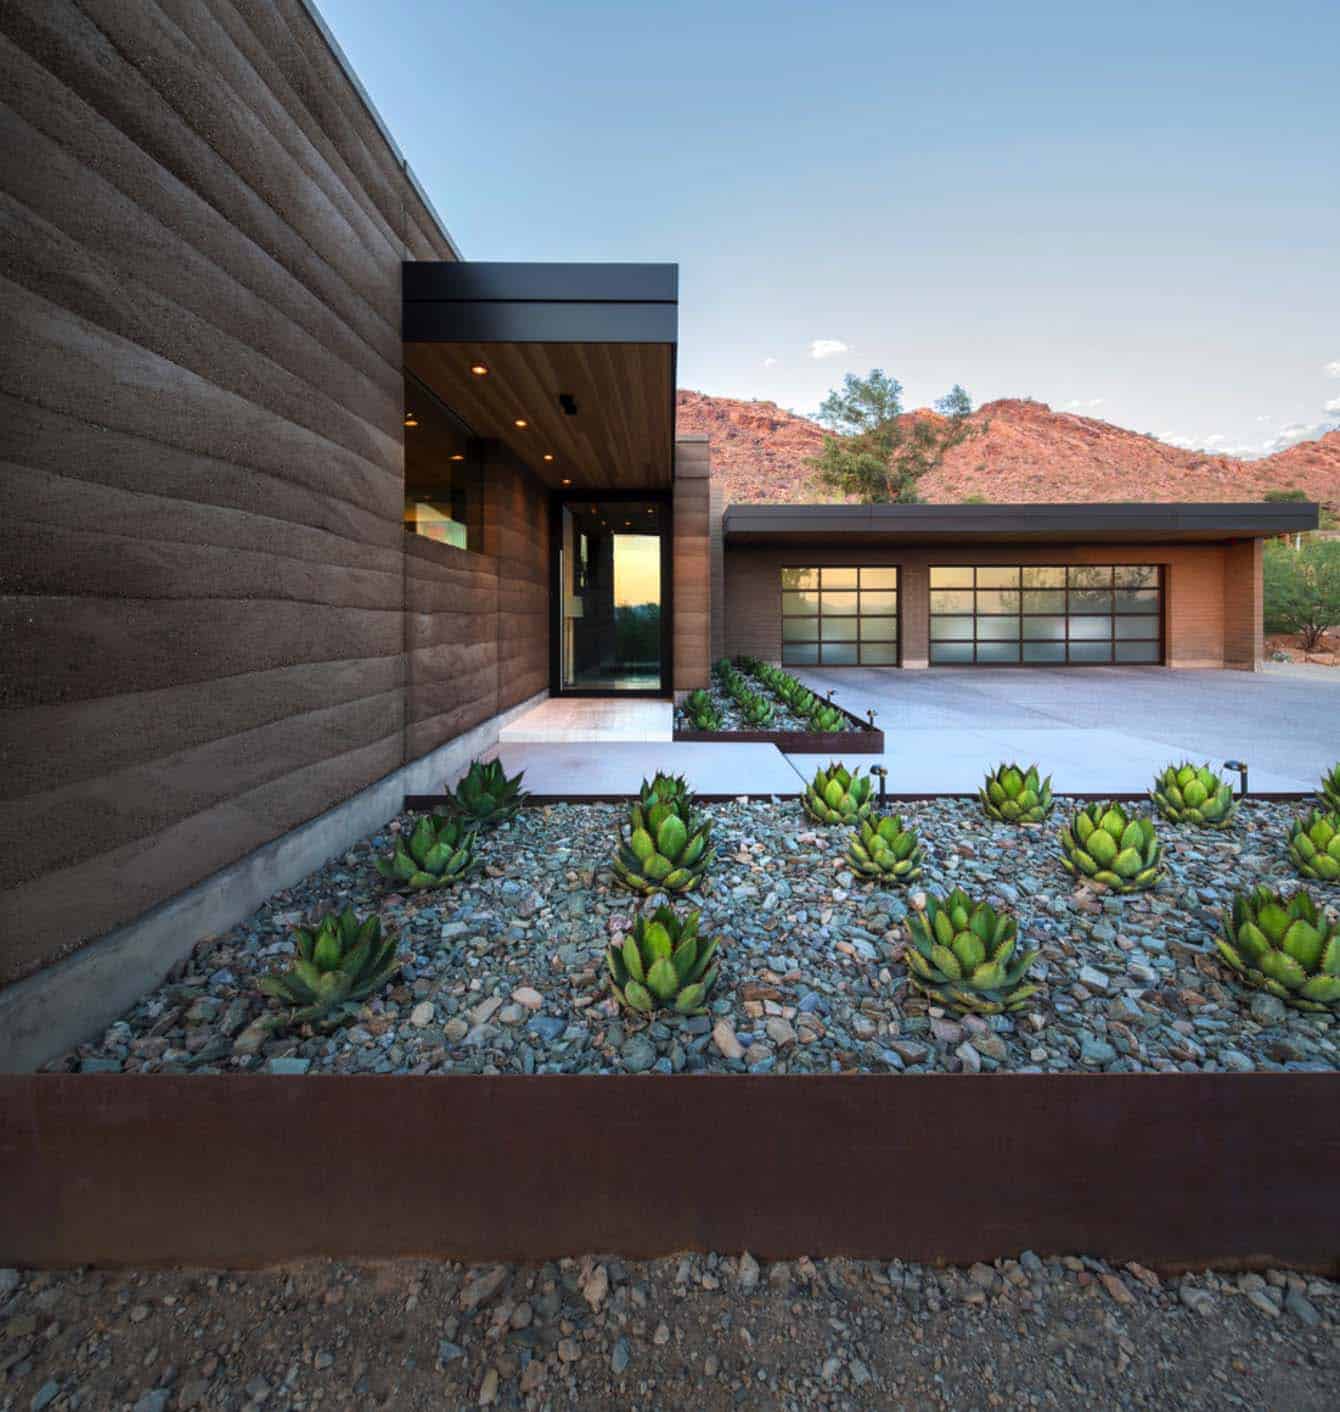 Fascinating rammed earth home piercing the deserts of Arizona